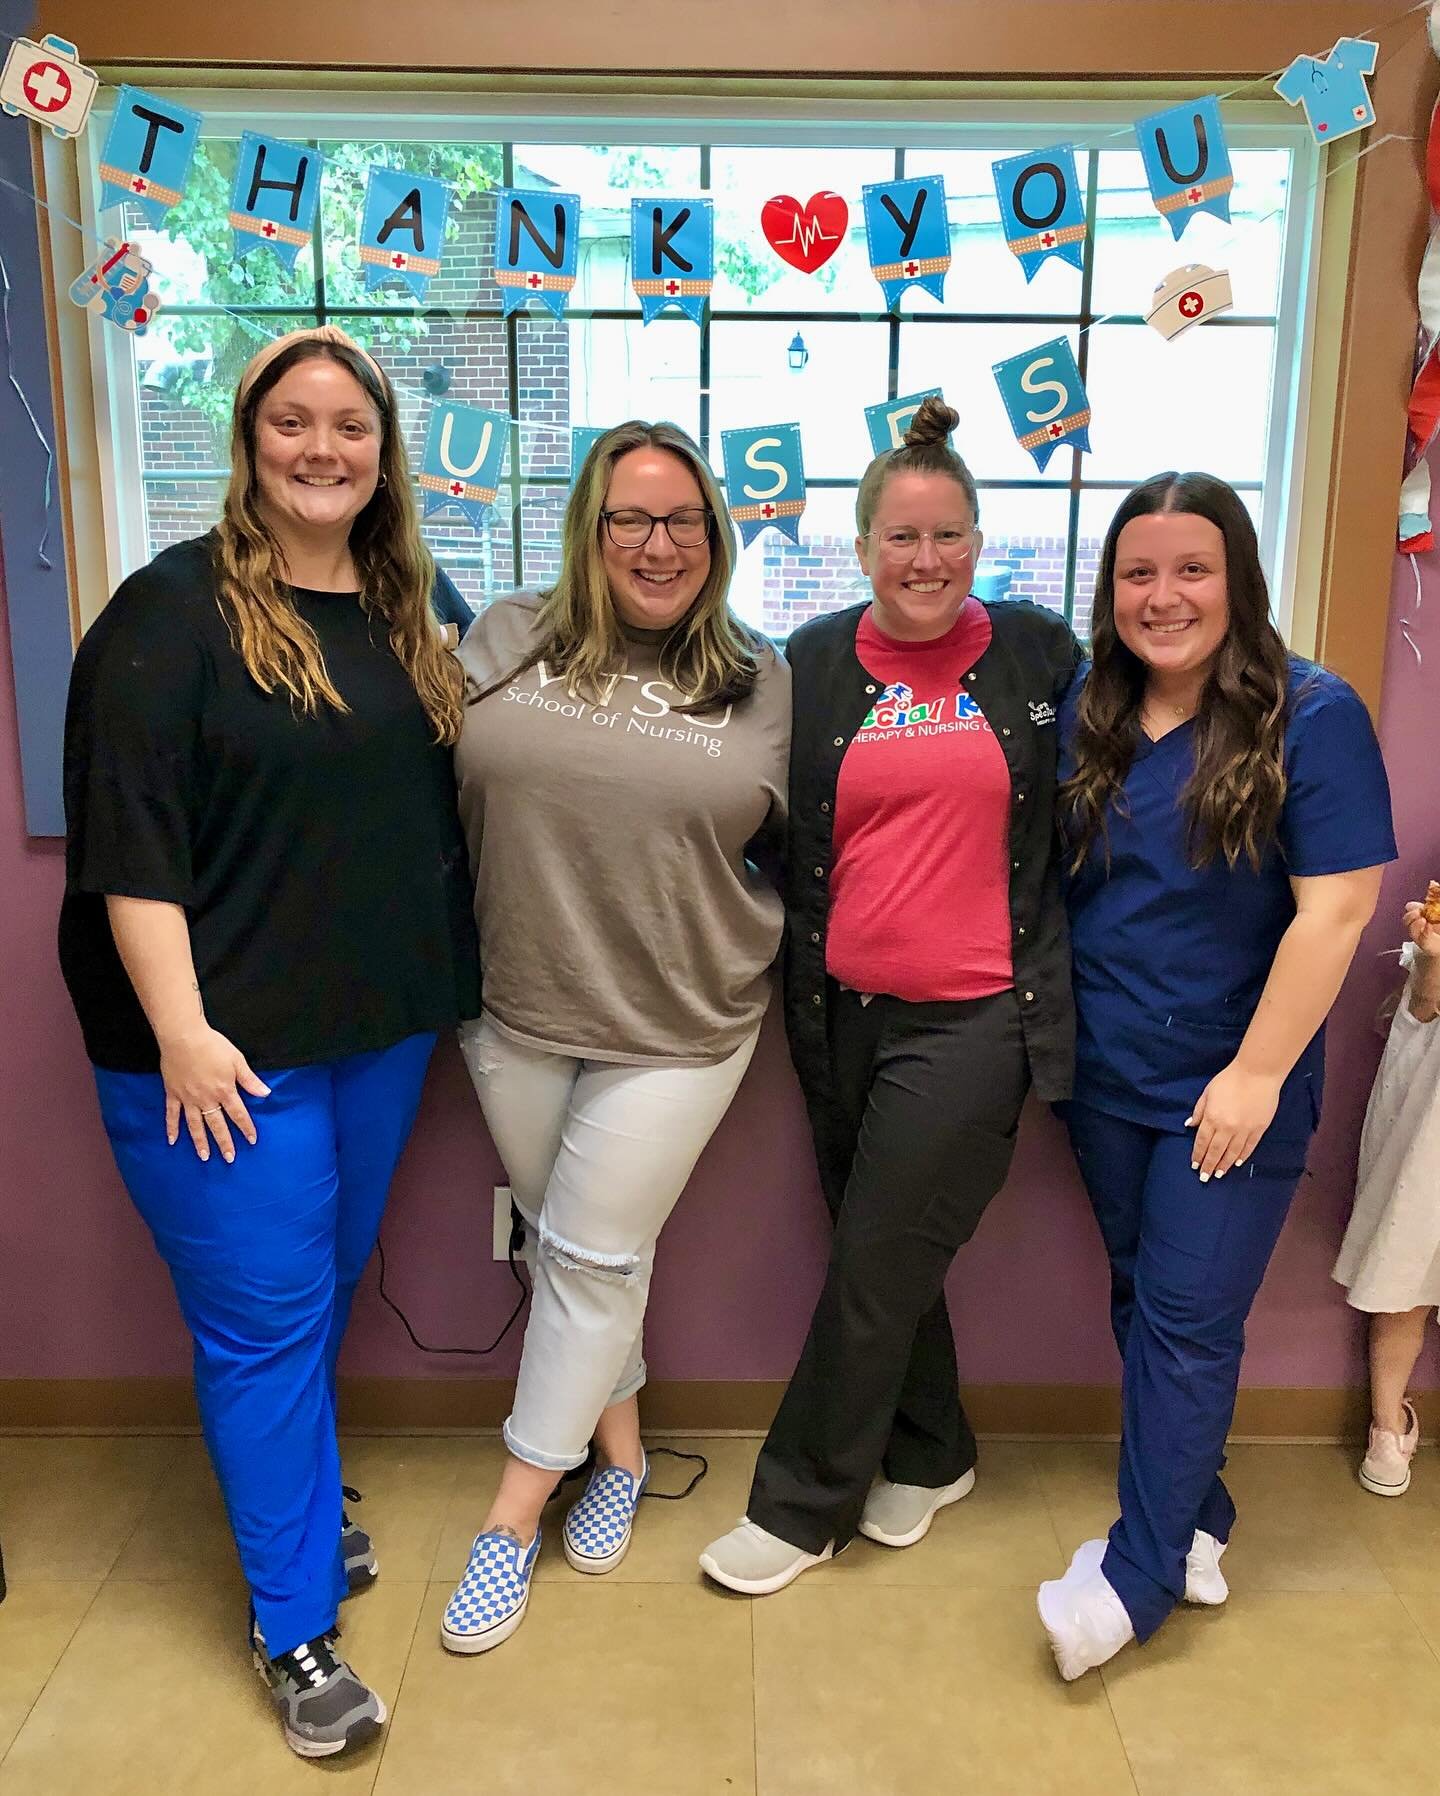 Showing special love to all of our nurses at our nursing center for nurses week!! Thank you for all you do 🤍